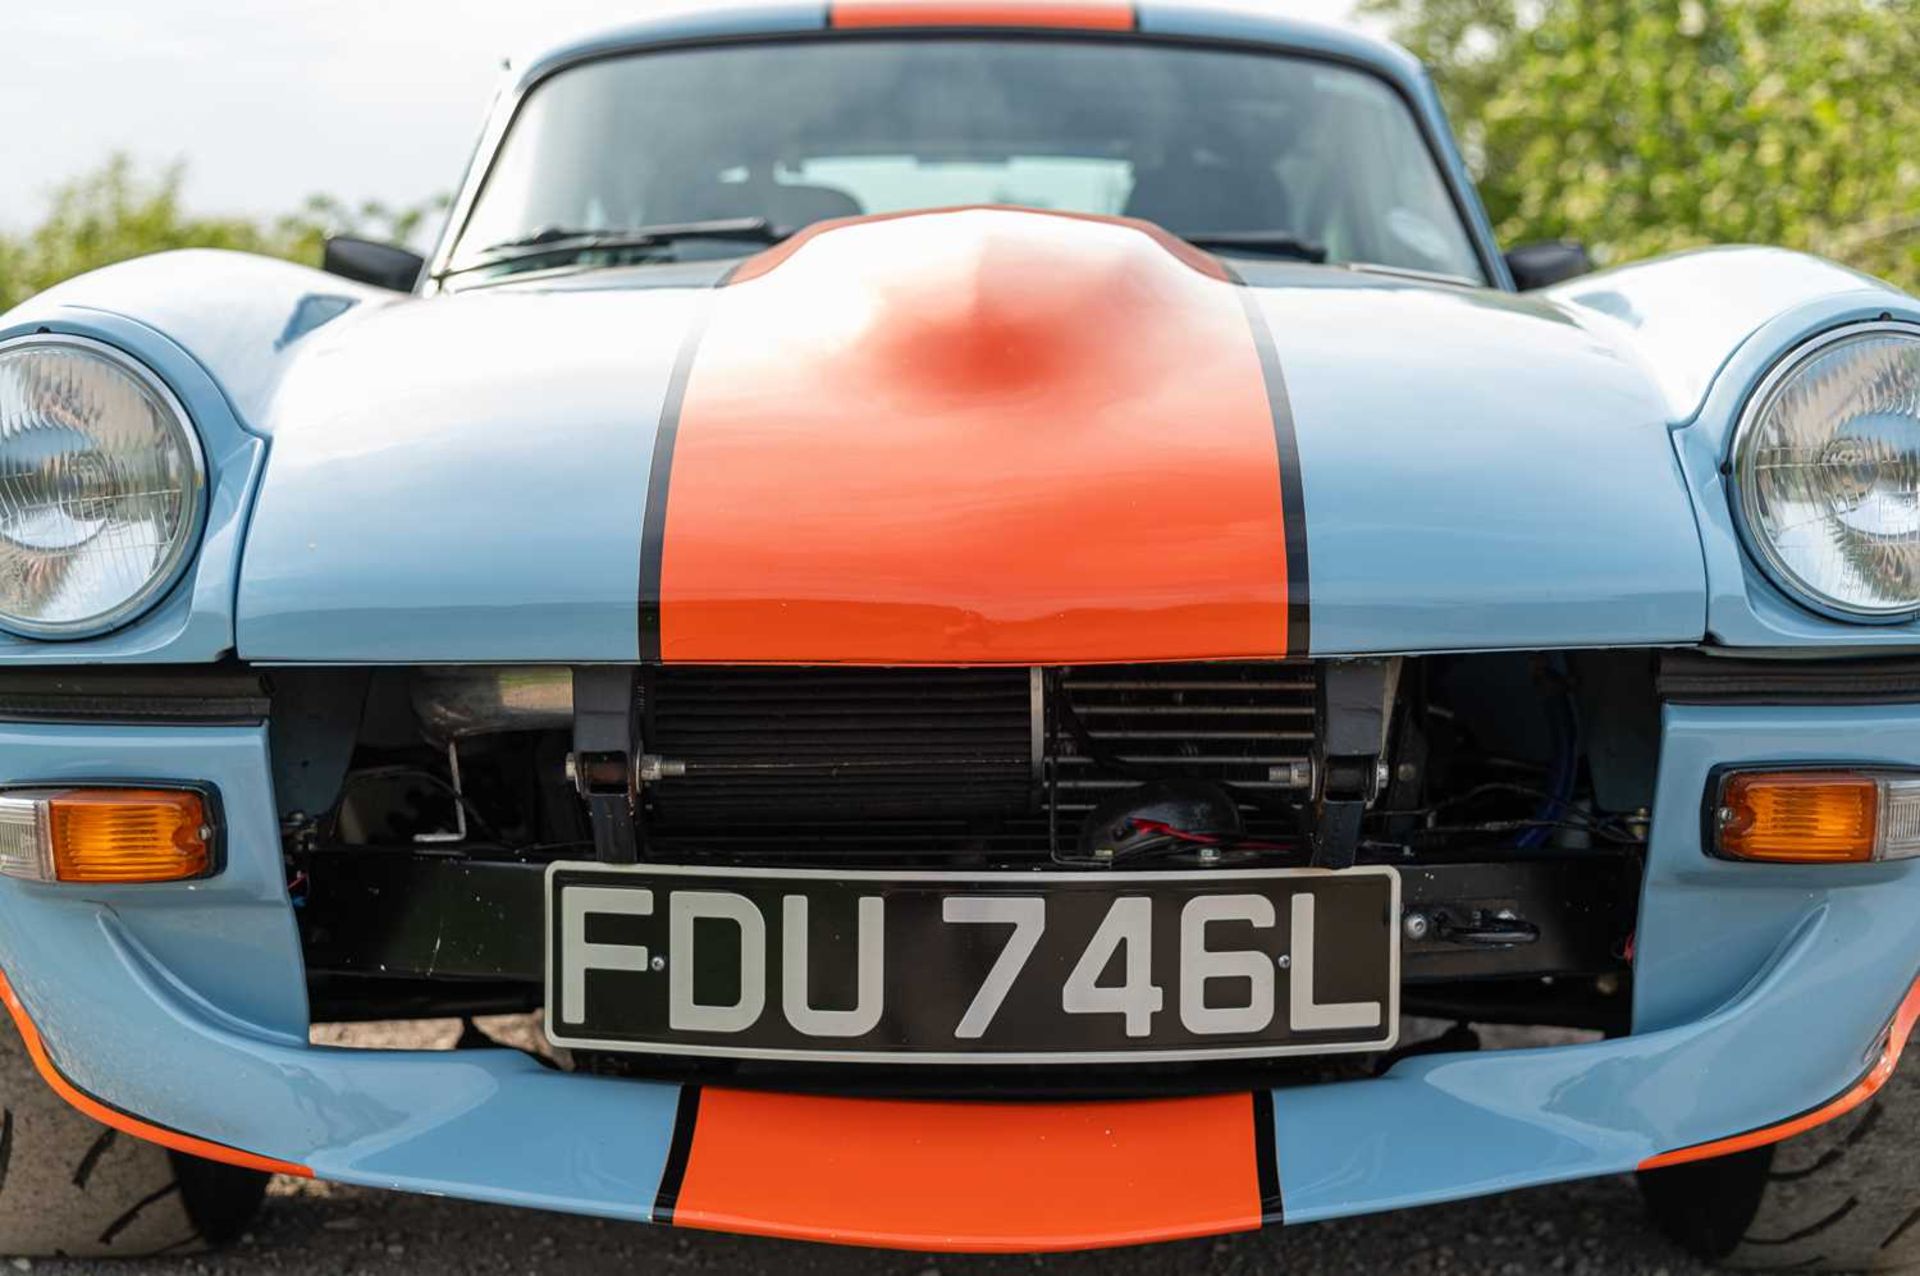 1973 Triumph GT6  ***NO RESERVE*** Presented in Gulf Racing-inspired paintwork, road-going track wea - Image 28 of 65